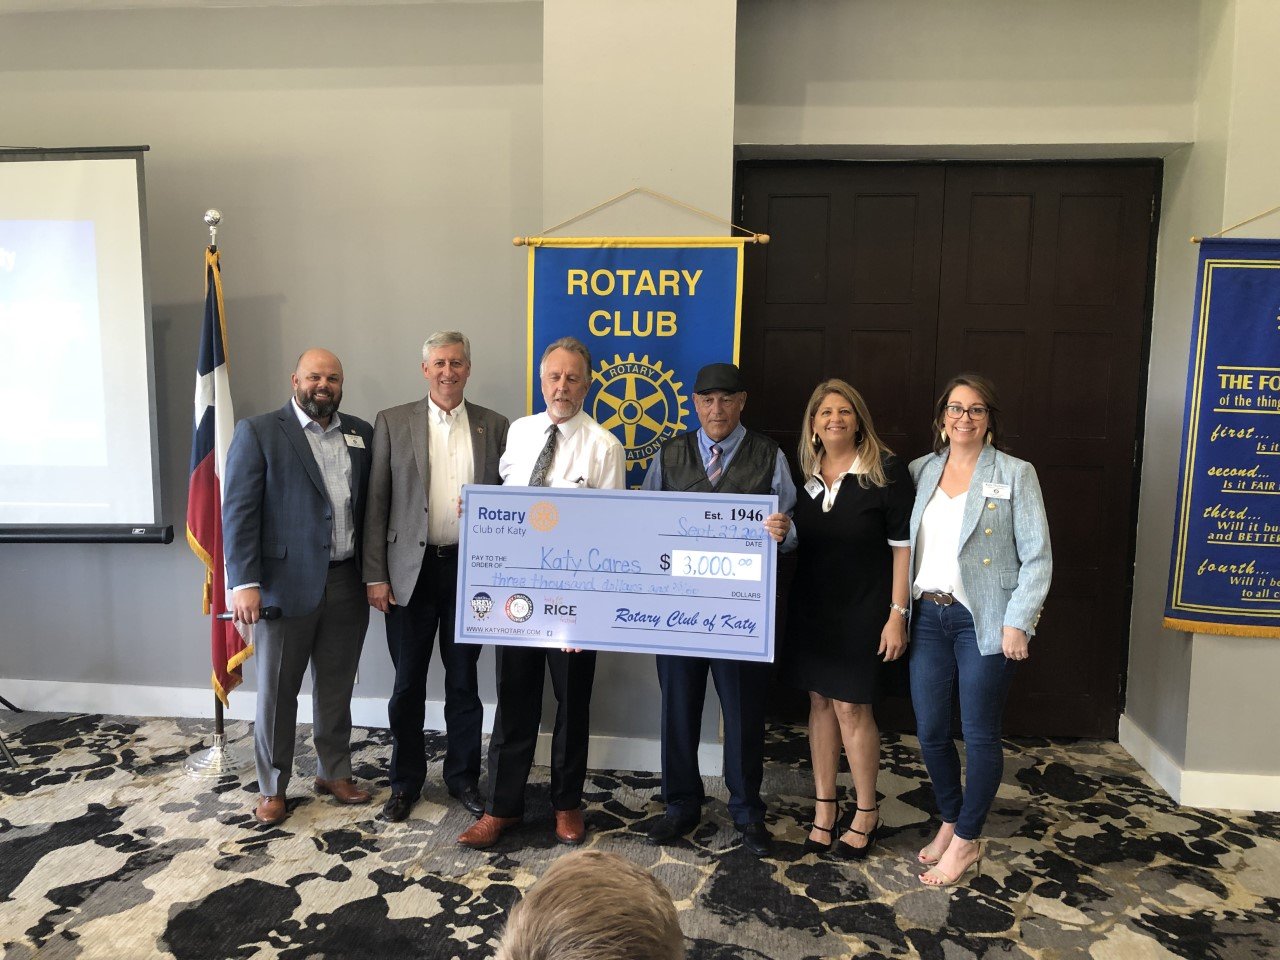 The Rotary Club of Katy made a donation to Katy Cares, a local nonprofit organization focused on serving single-parent families who are victims of trauma due to a life-altering event such as domestic violence or abuse. Pictured from left to right are Rocky Blair, Mayor Dusty Thiele, David Pieterse, Thom Polvogt, Tara Wilson and Kate Maranacci.